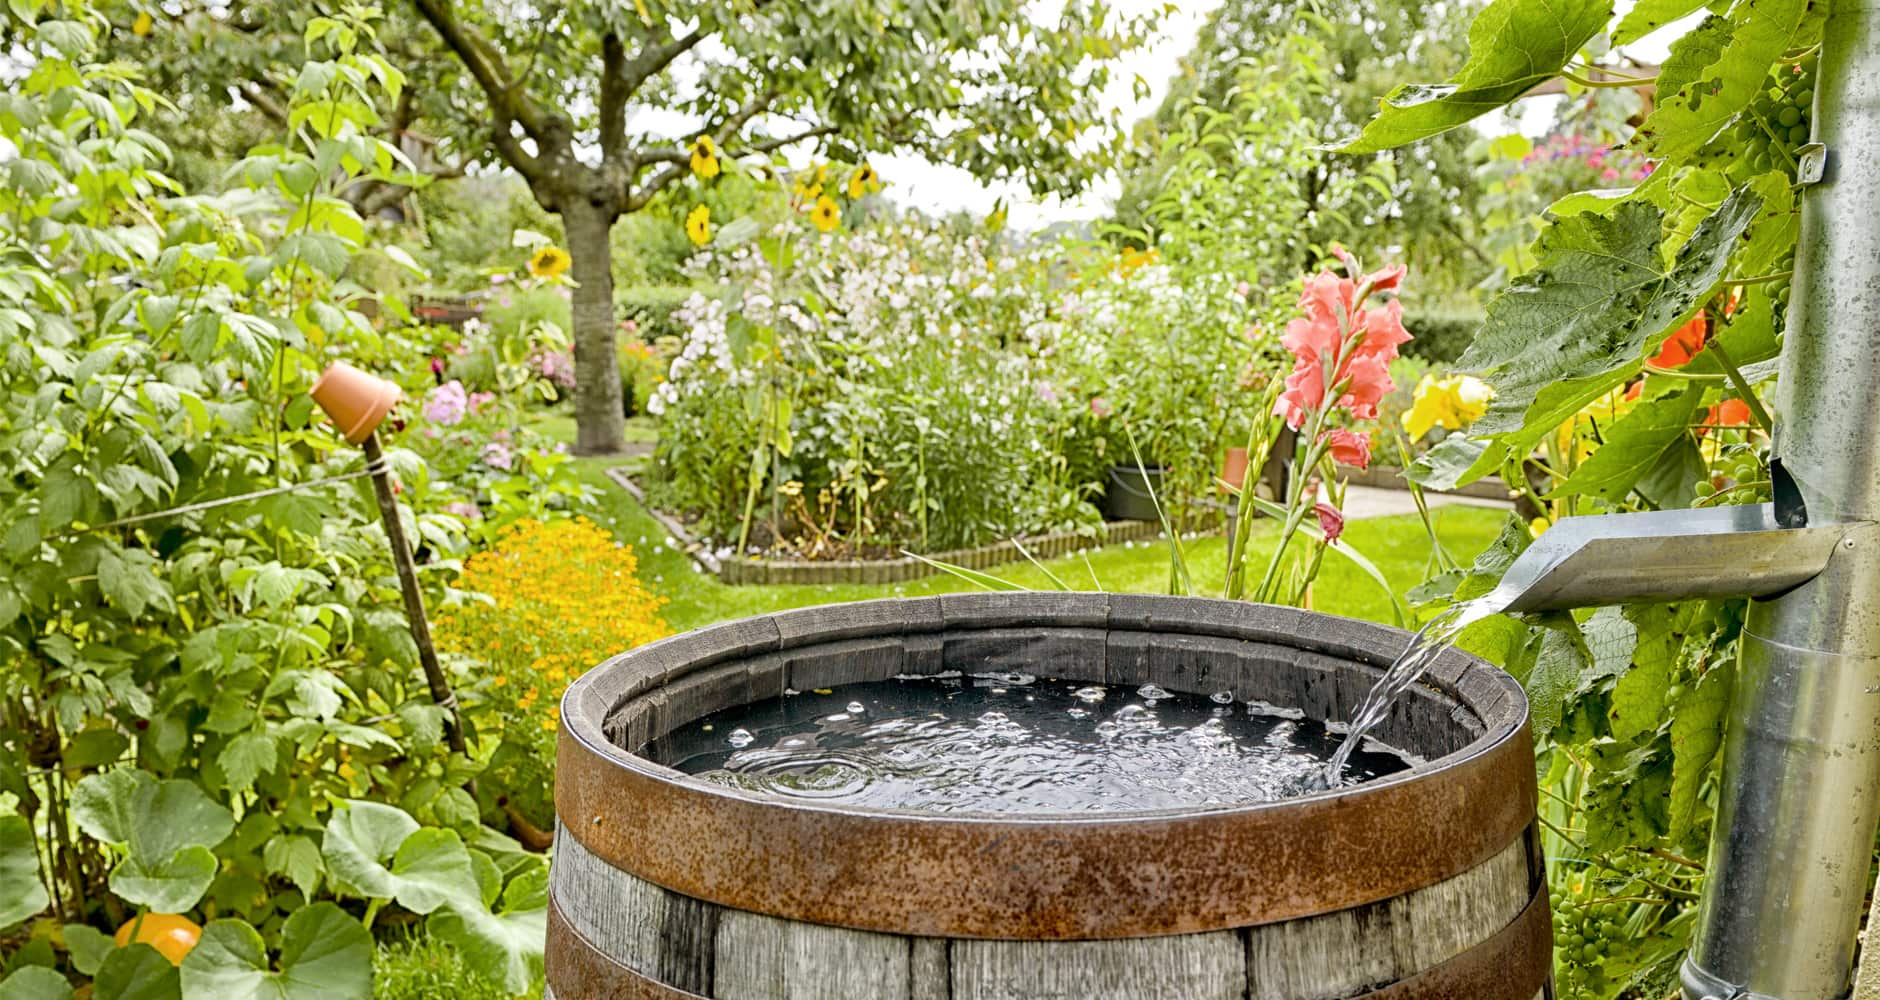 Rainwater Harvesting: What is it and is it beneficial?